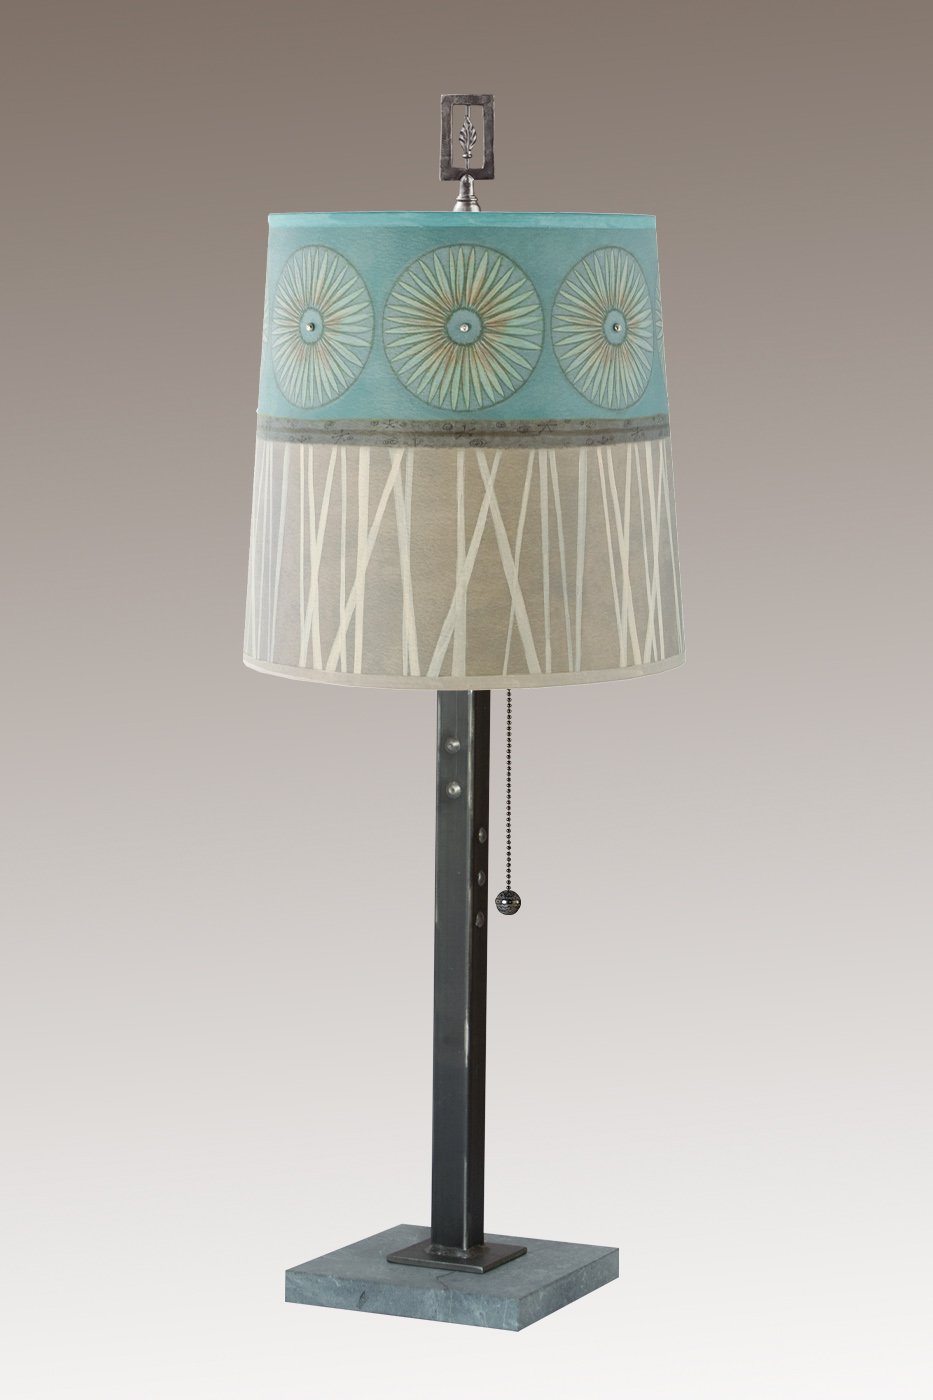 Janna Ugone & Co Table Lamps Steel Table Lamp with Small Drum Shade in Pool